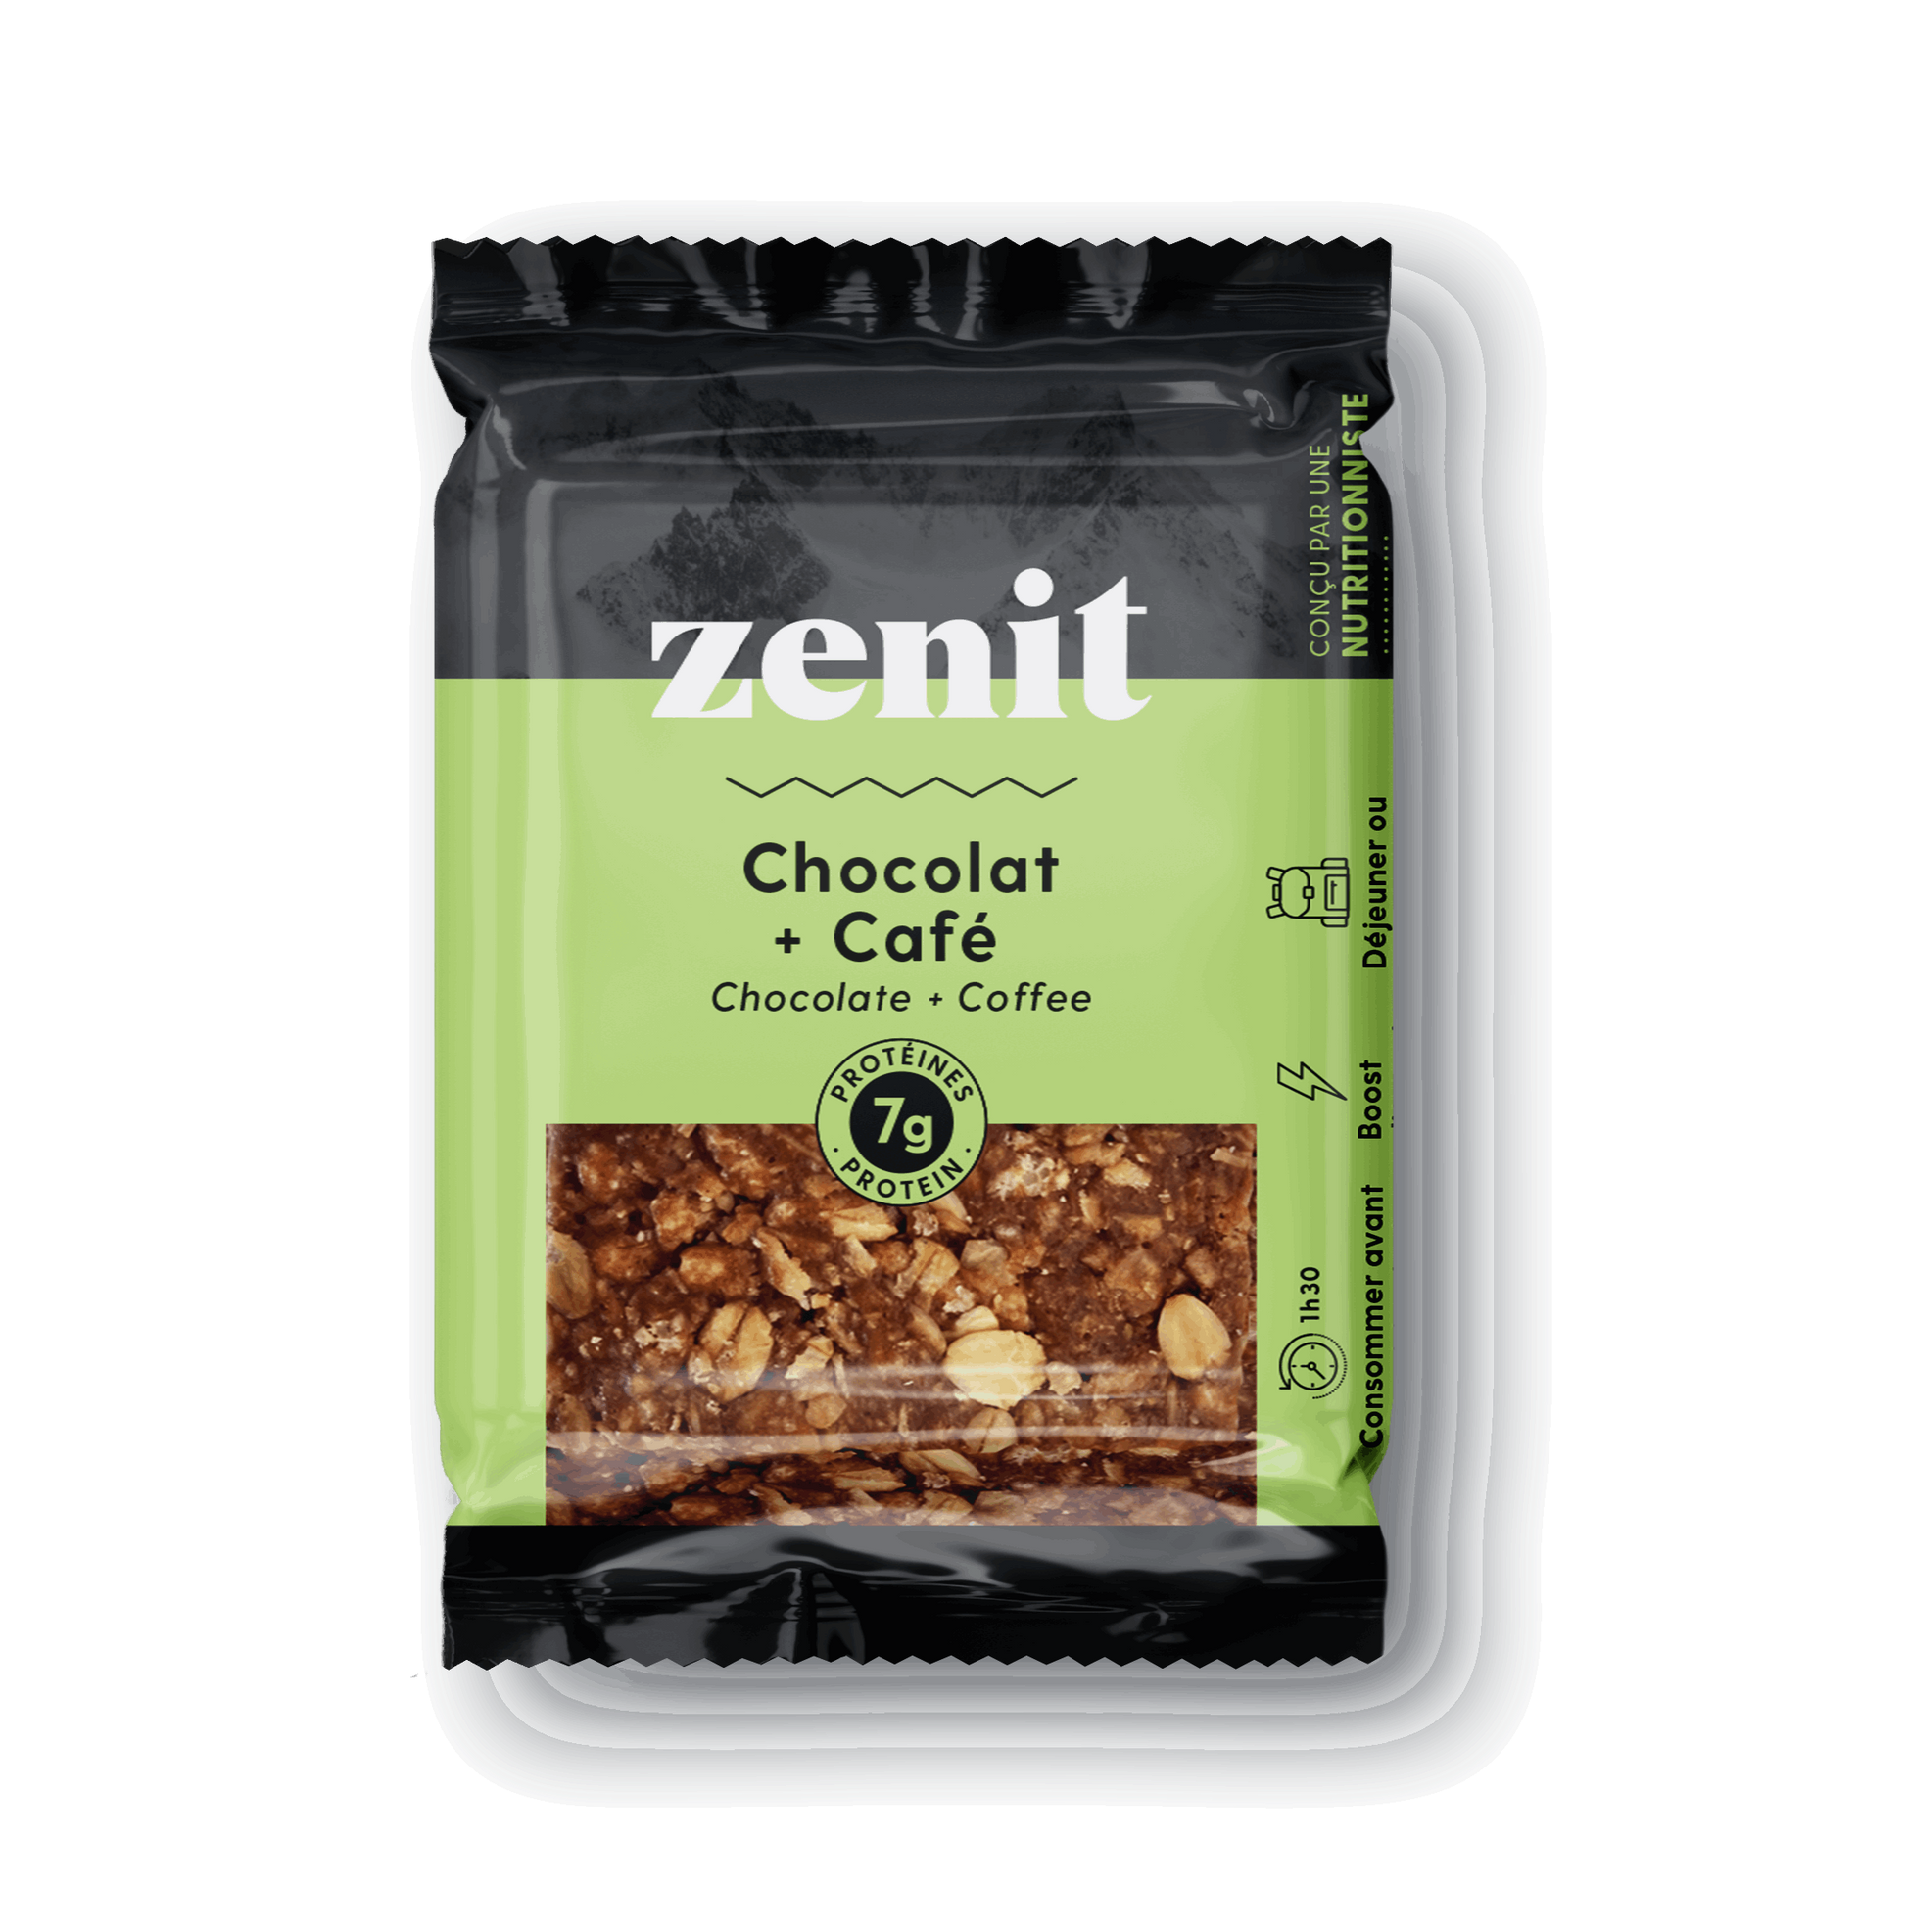 Chocolate and coffee flavored Zenit granola nutrition product